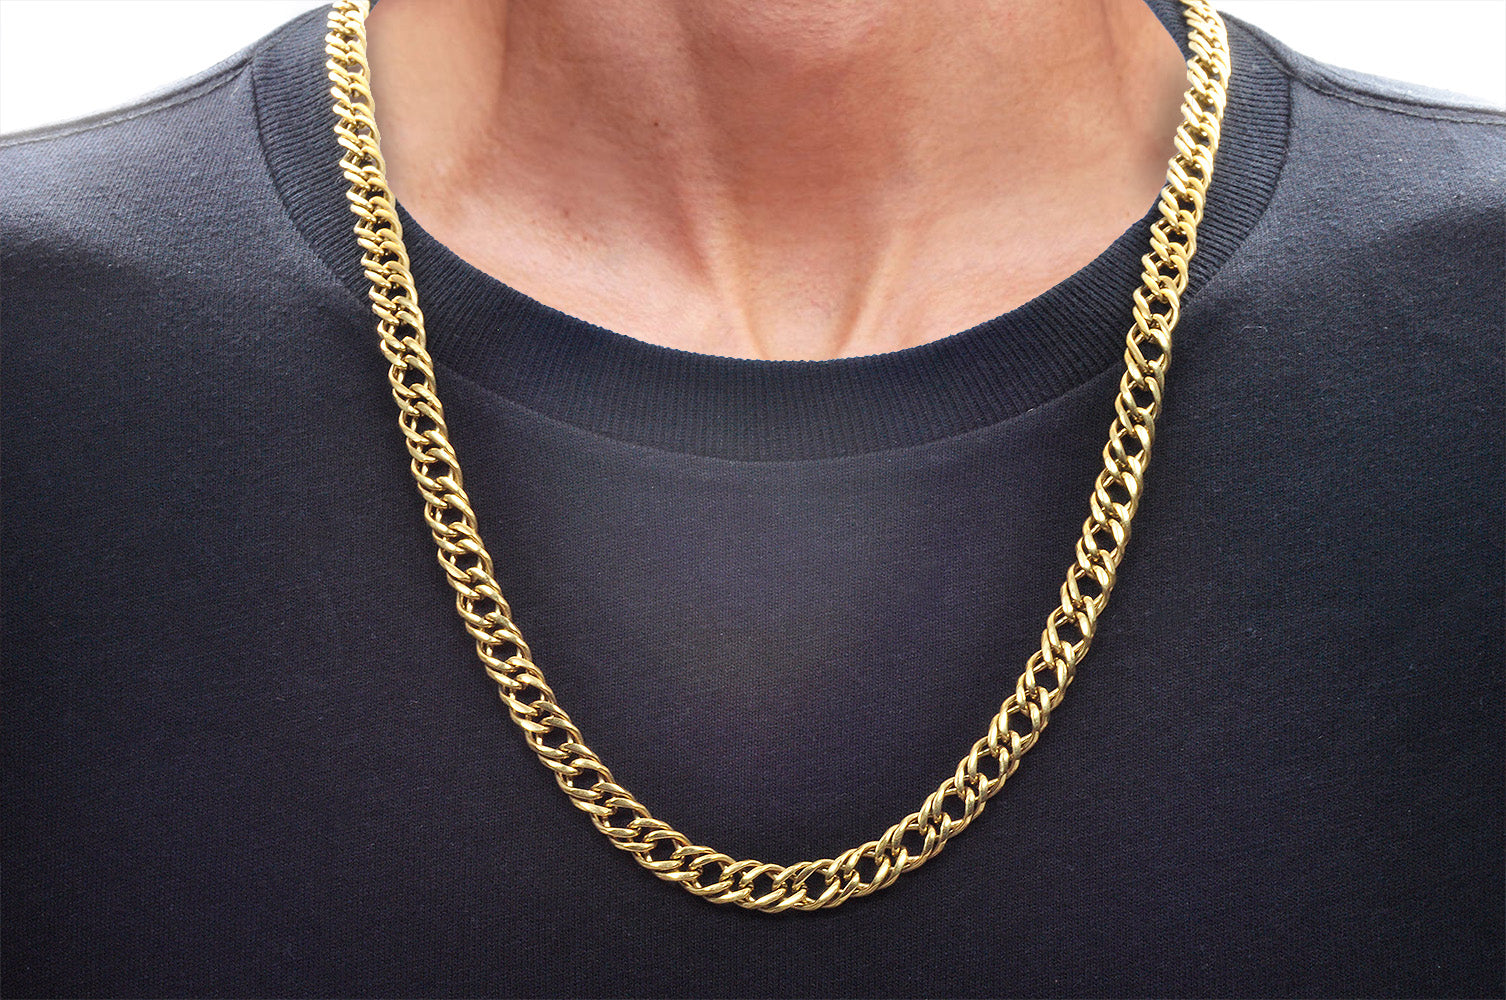 Steel by Design Men's Double Box & Rope Chain Necklace - QVC.com